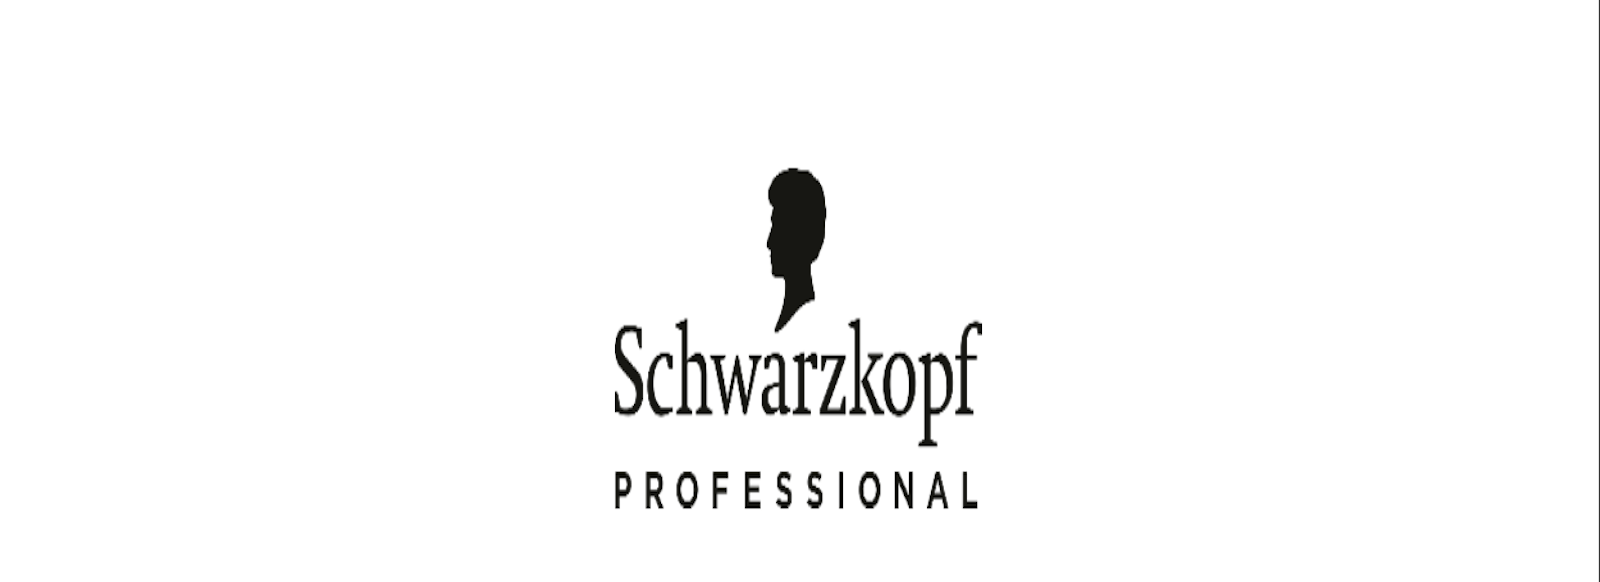 Ask Academy Logo - Schwarzkopf Professional offers education opportunities - Concept ...